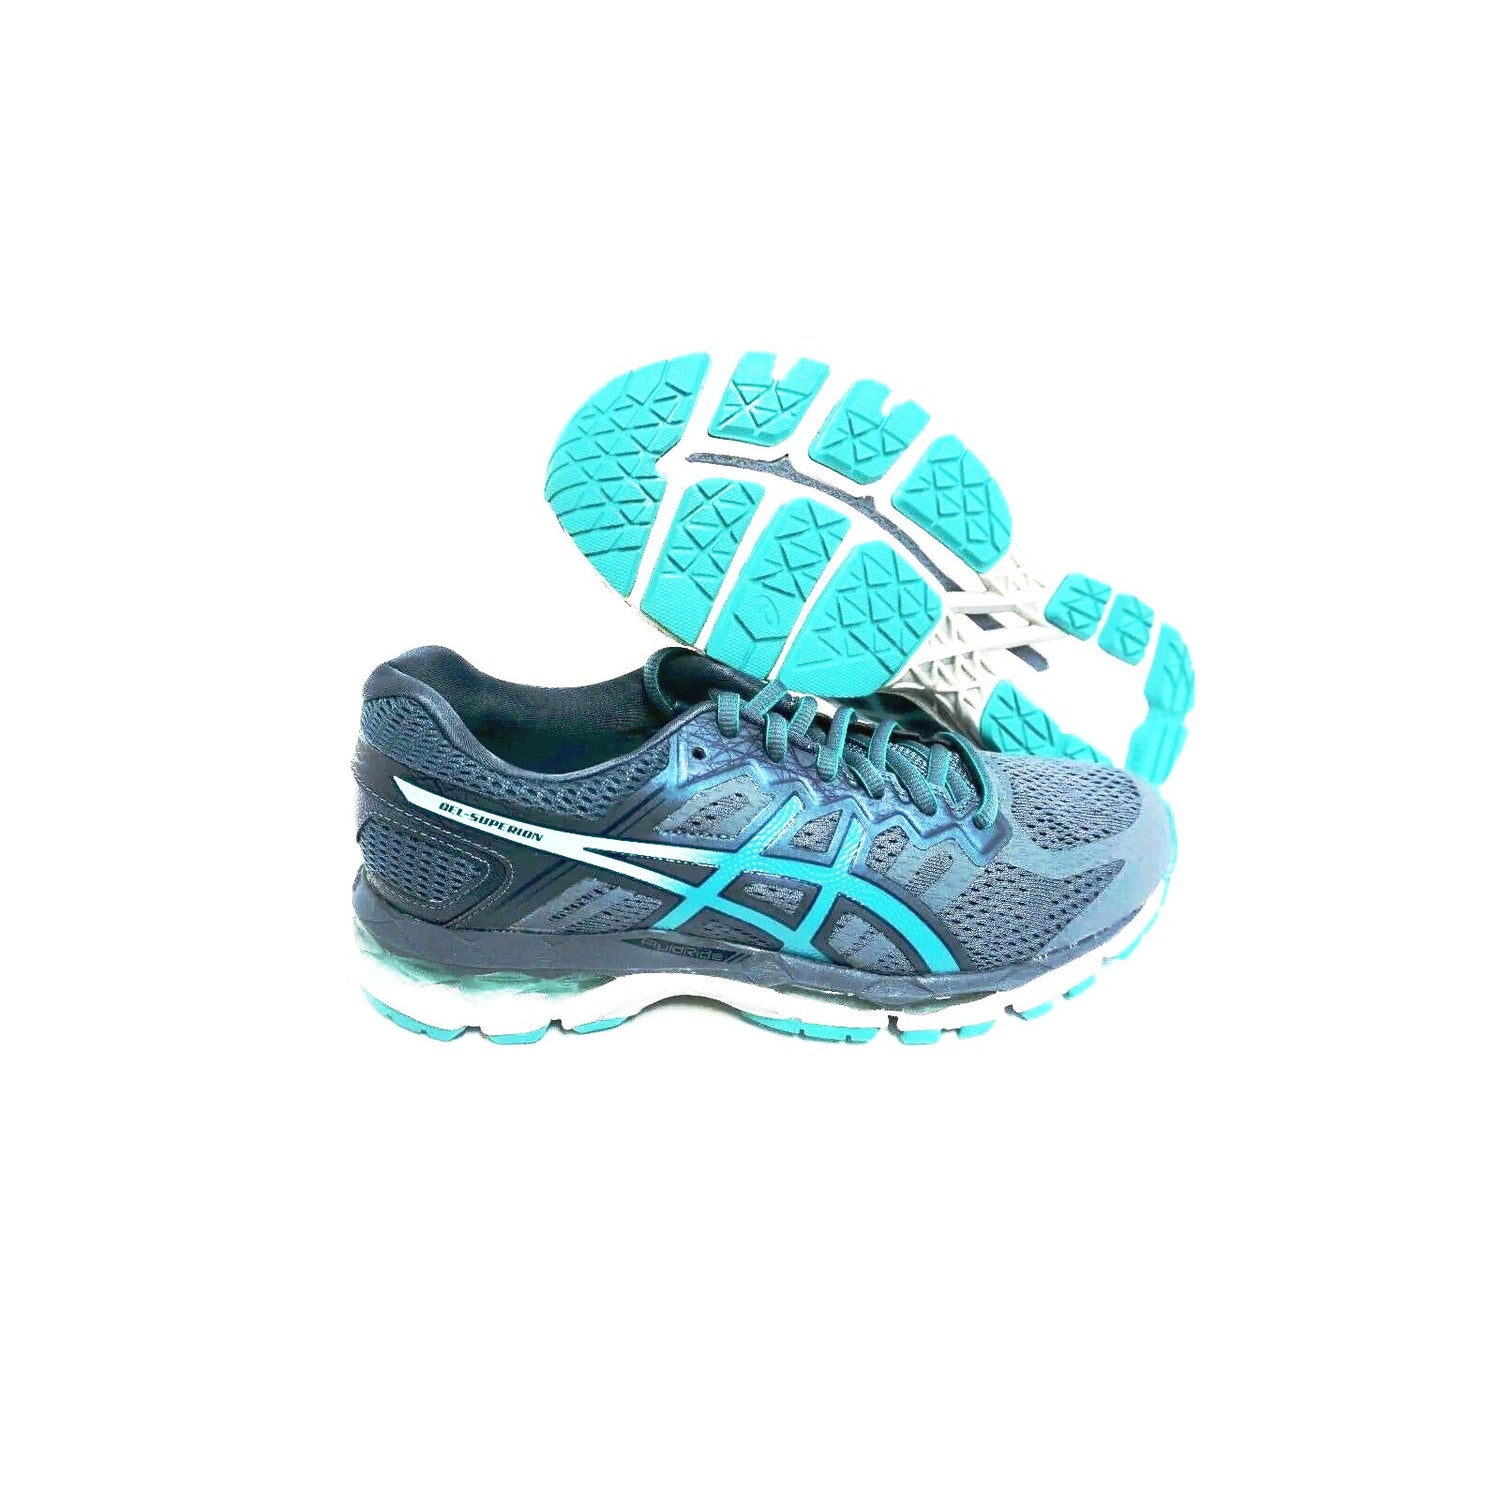 Asics women's gel-superion smoke blue running shoes size 8.5 us new